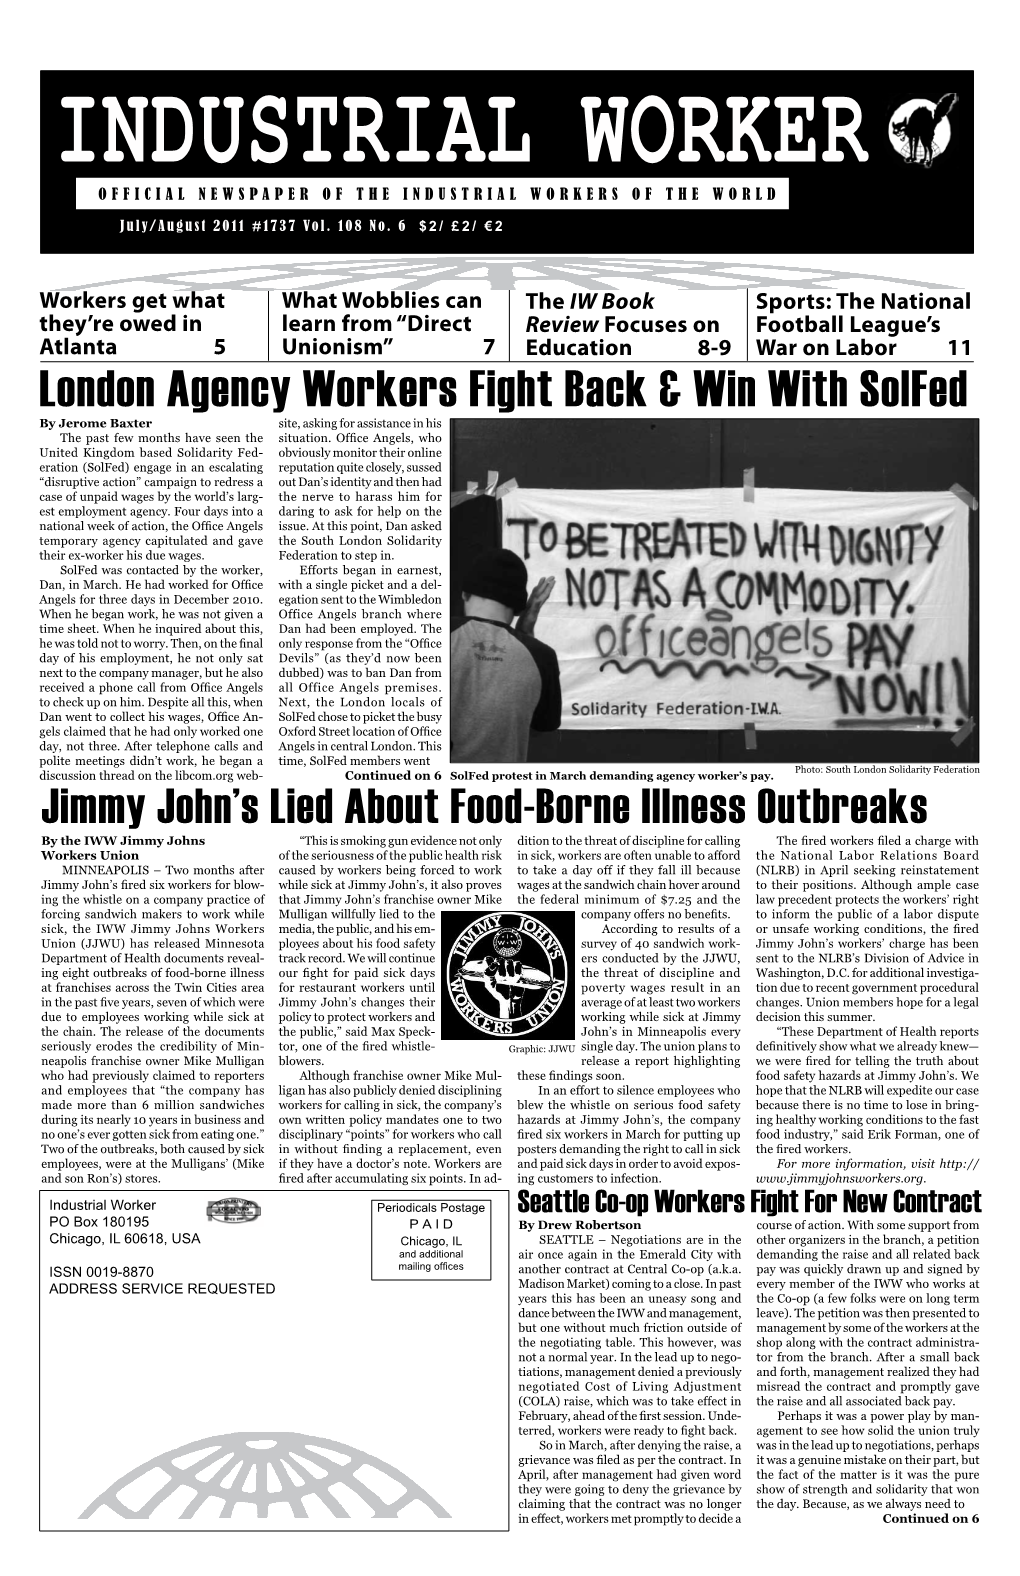 London Agency Workers Fight Back & Win with Solfed